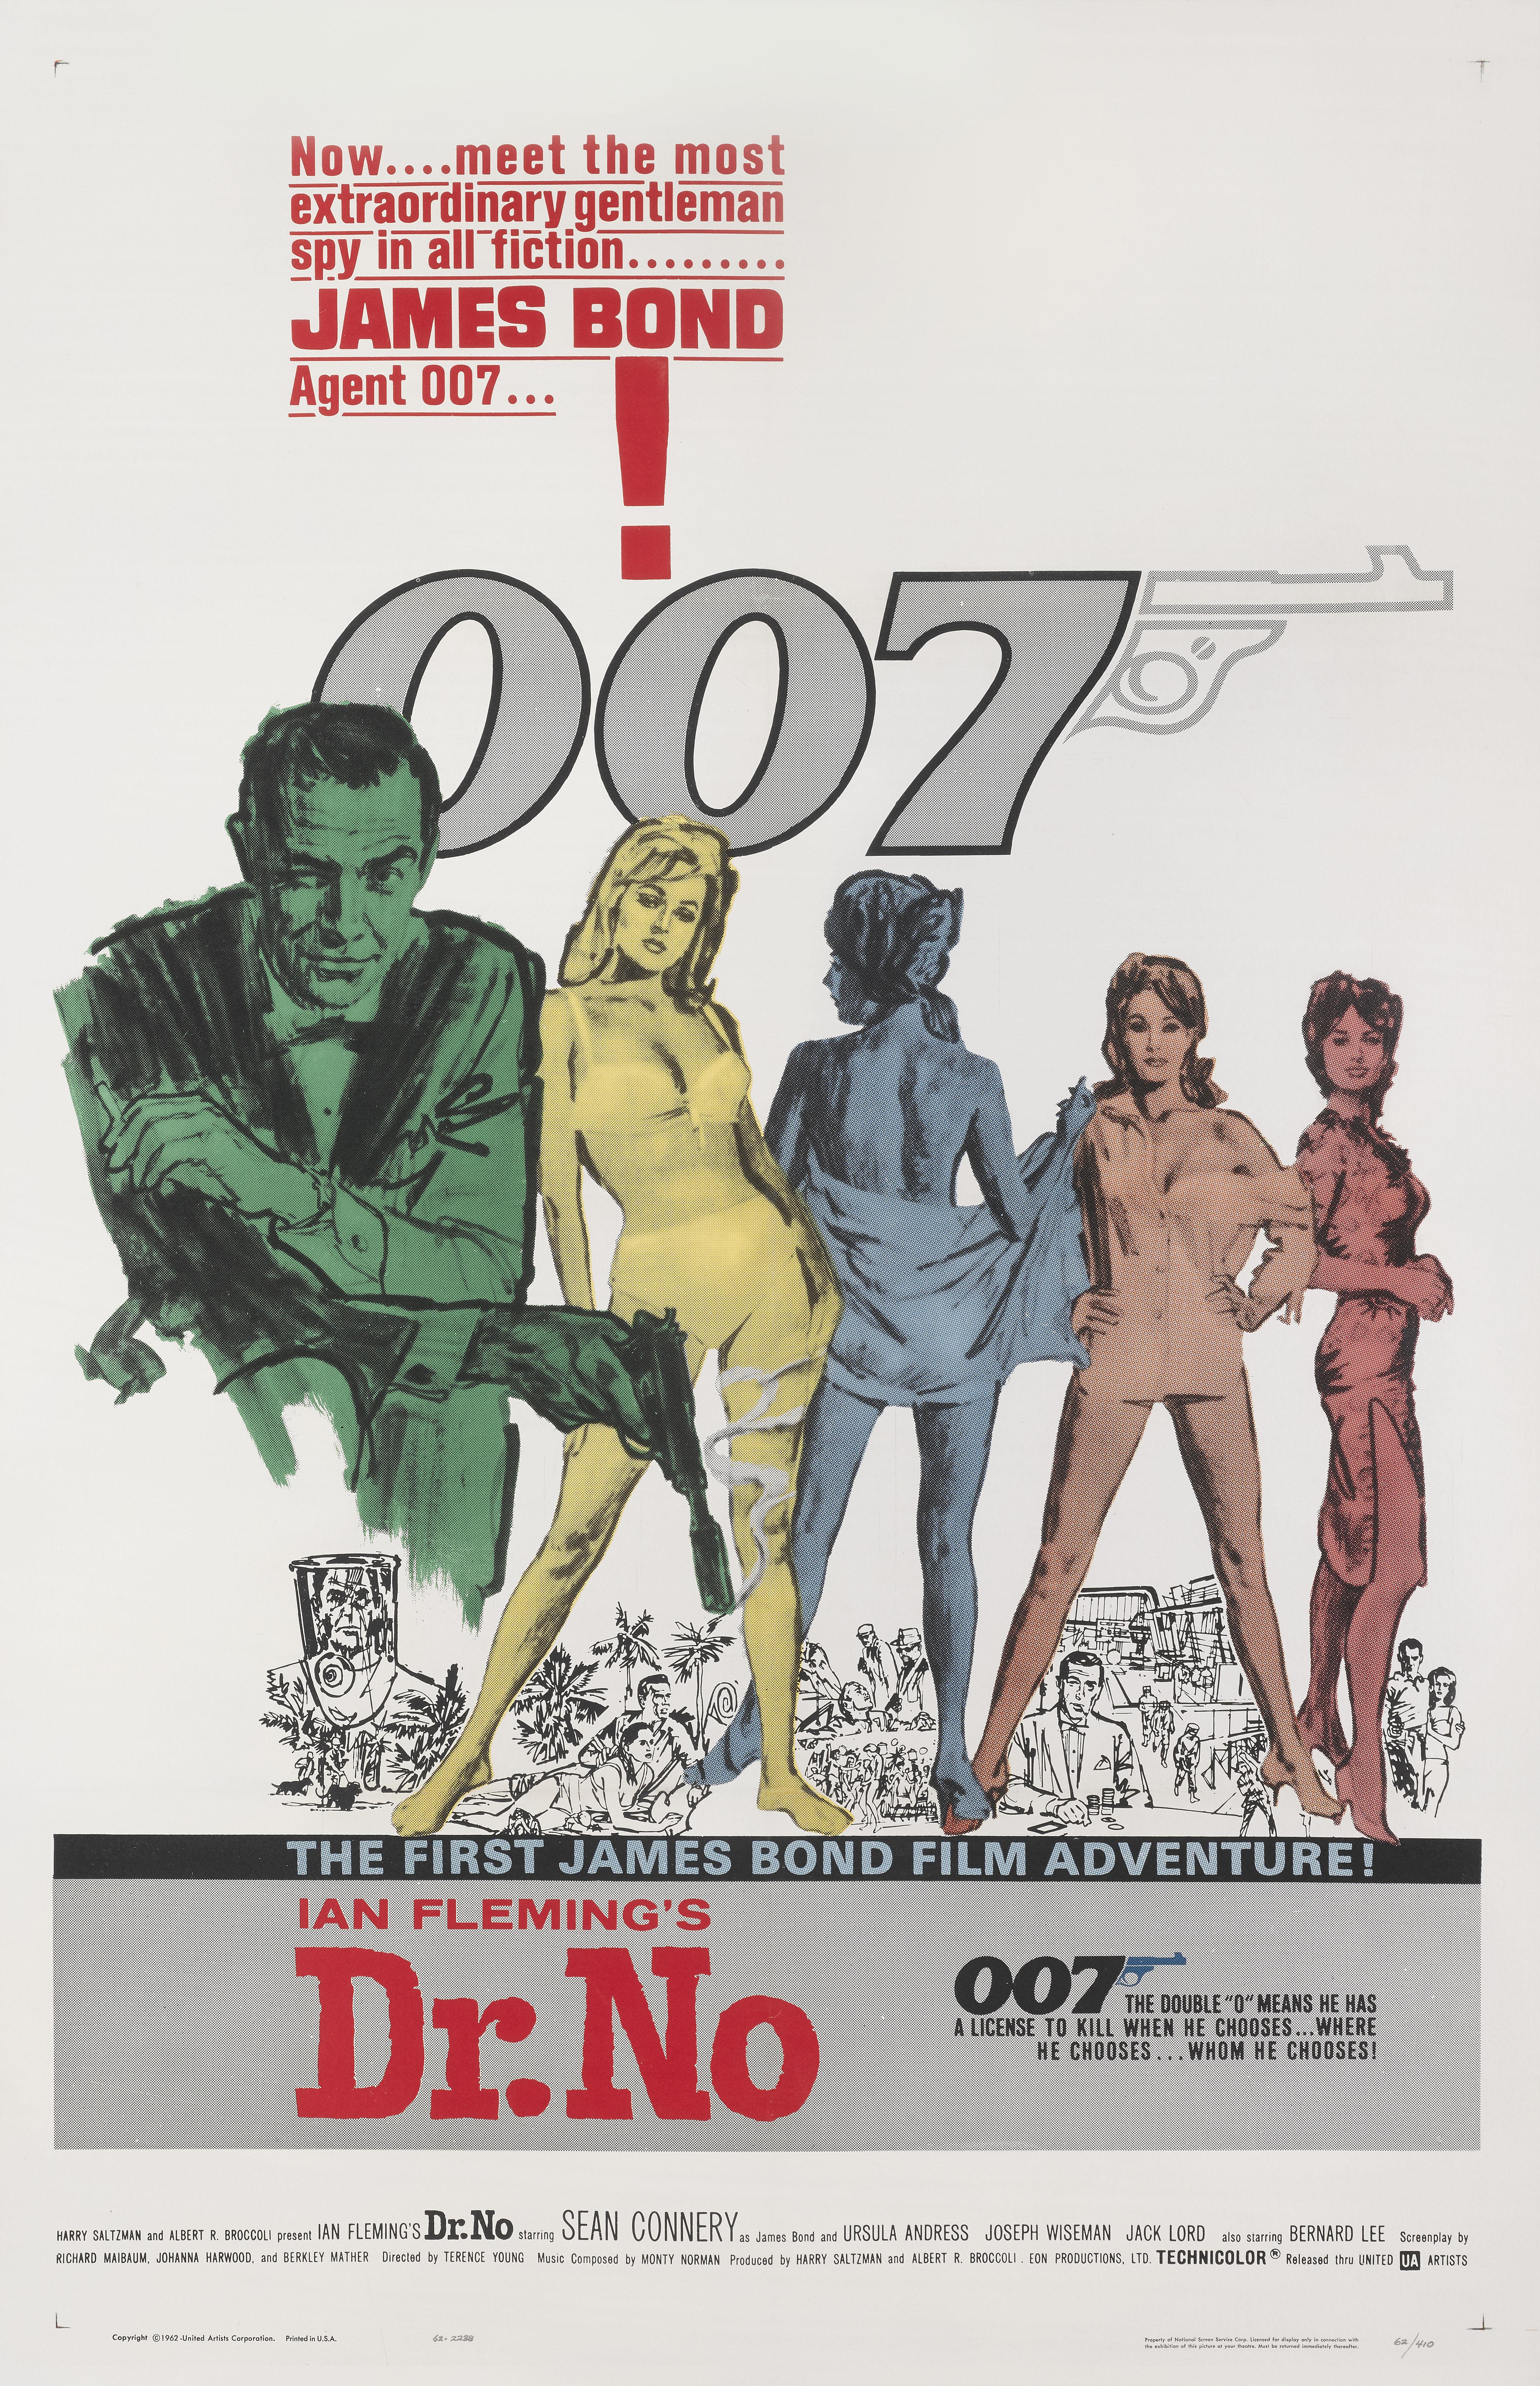 Original American film poster for Dr. No starring Sean Connery is the first James Bond film. Based on the 1958 novel of the same name by Ian Fleming. The film was the first of a successful series of now 24 Bond films.
This is the first film poster